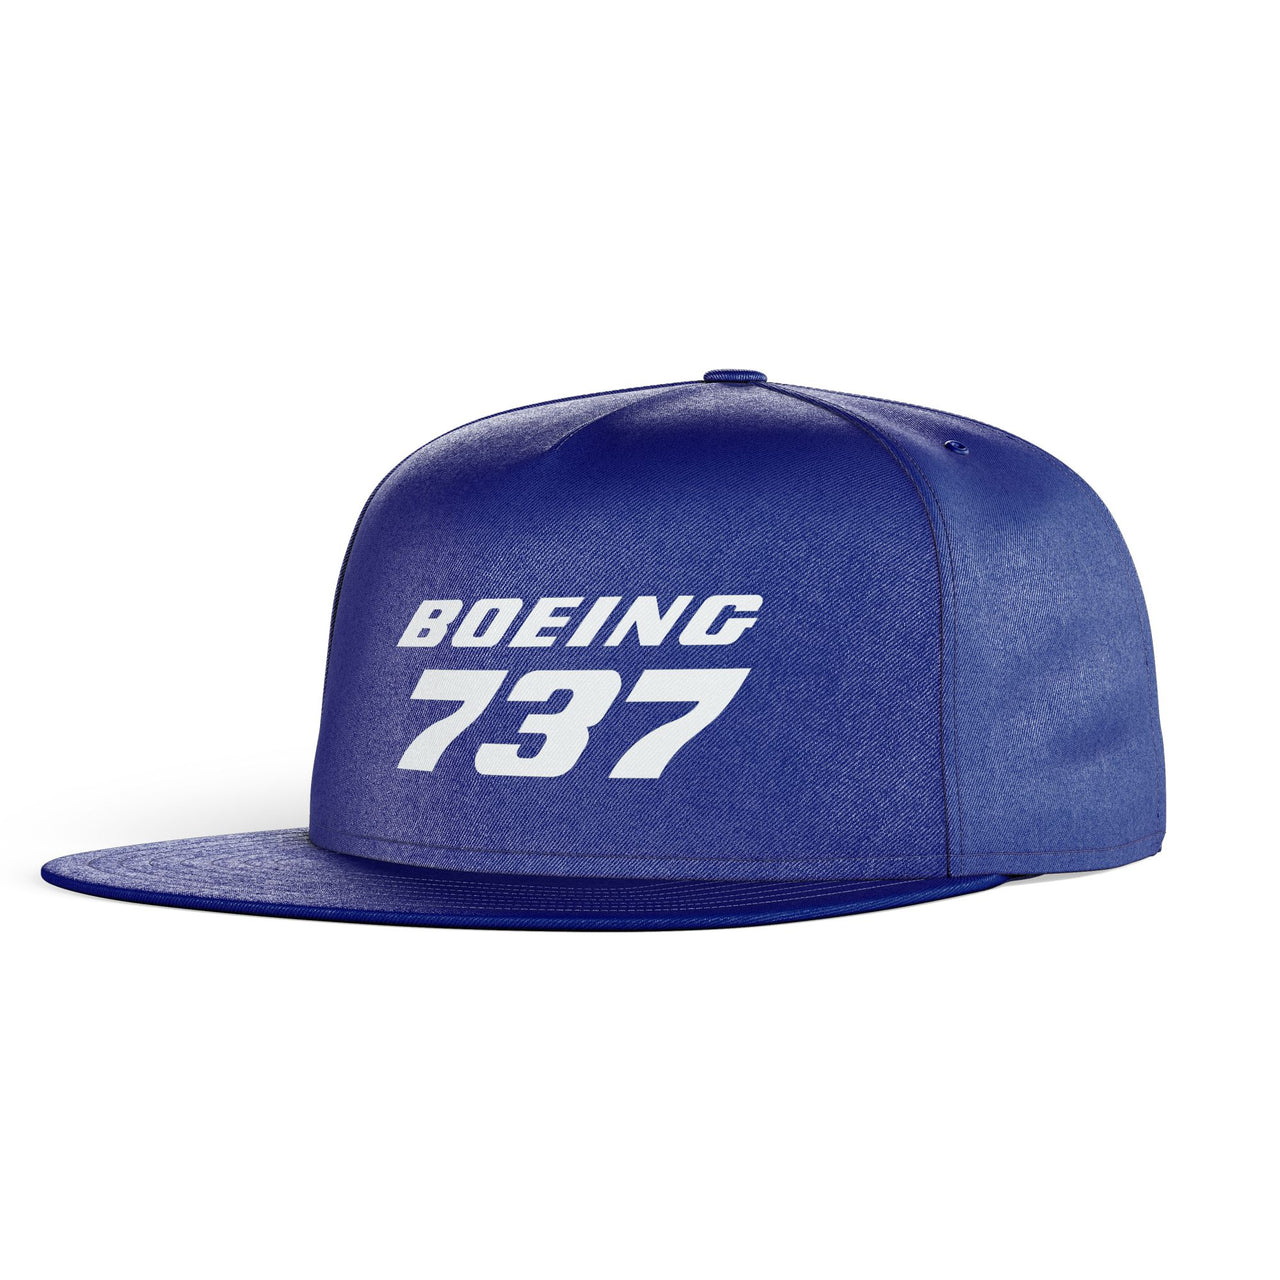 Boeing 737 & Text Designed Snapback Caps & Hats